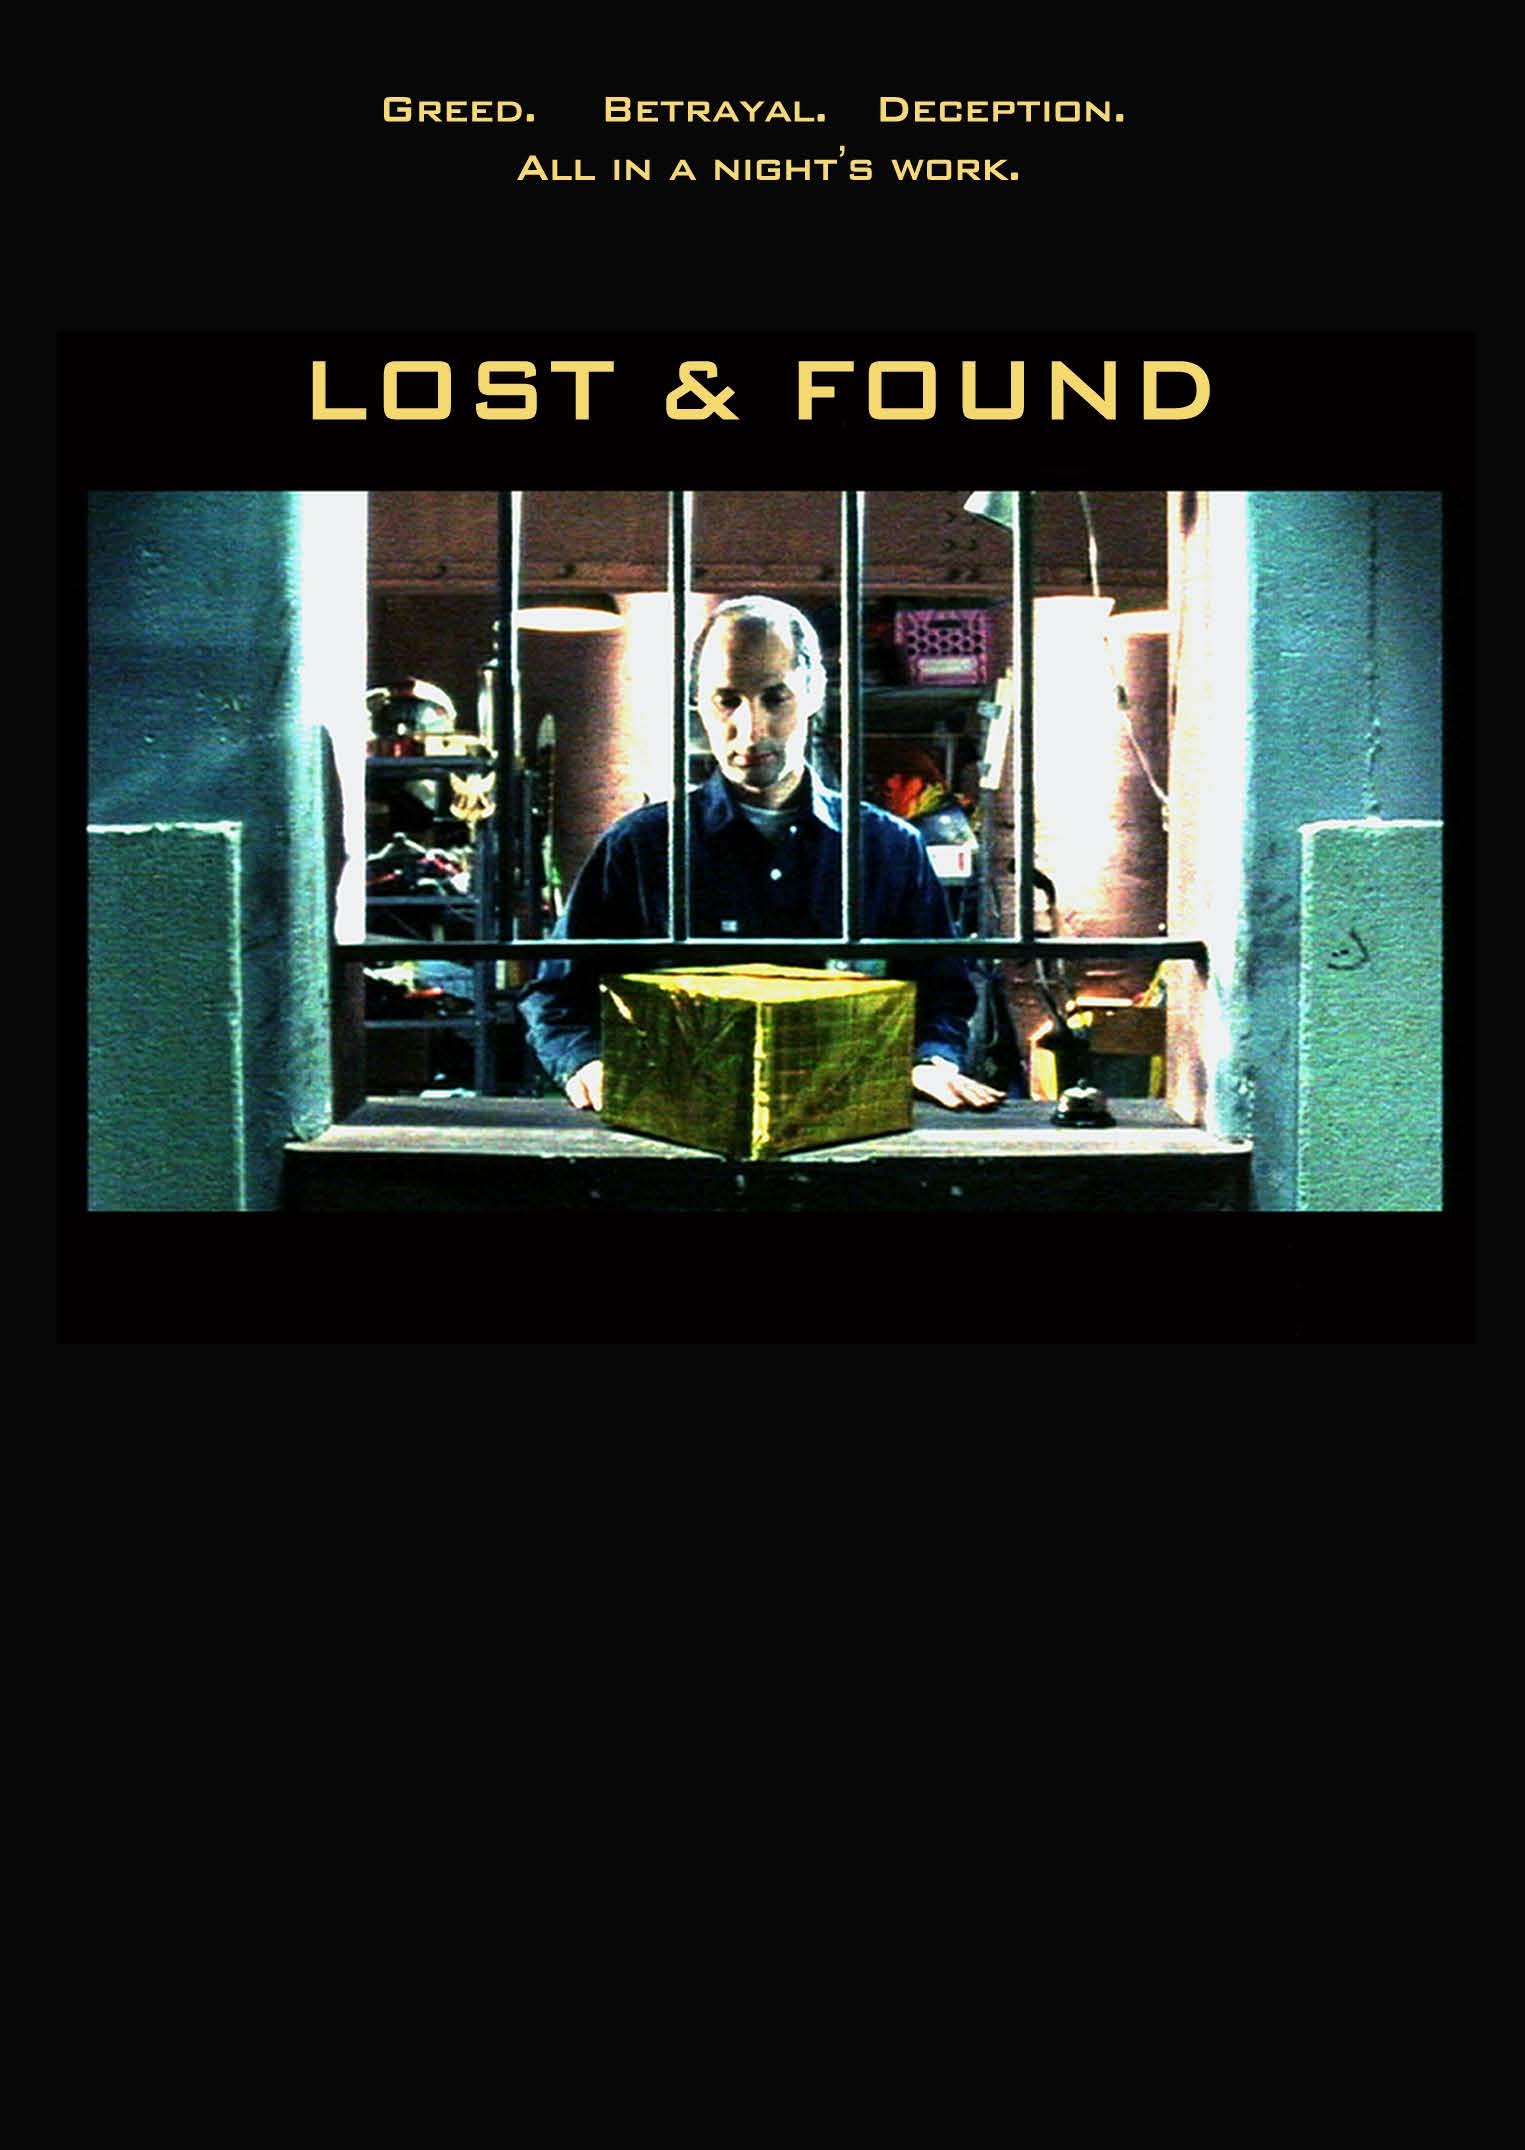 Lost and Found Poster Art.jpg